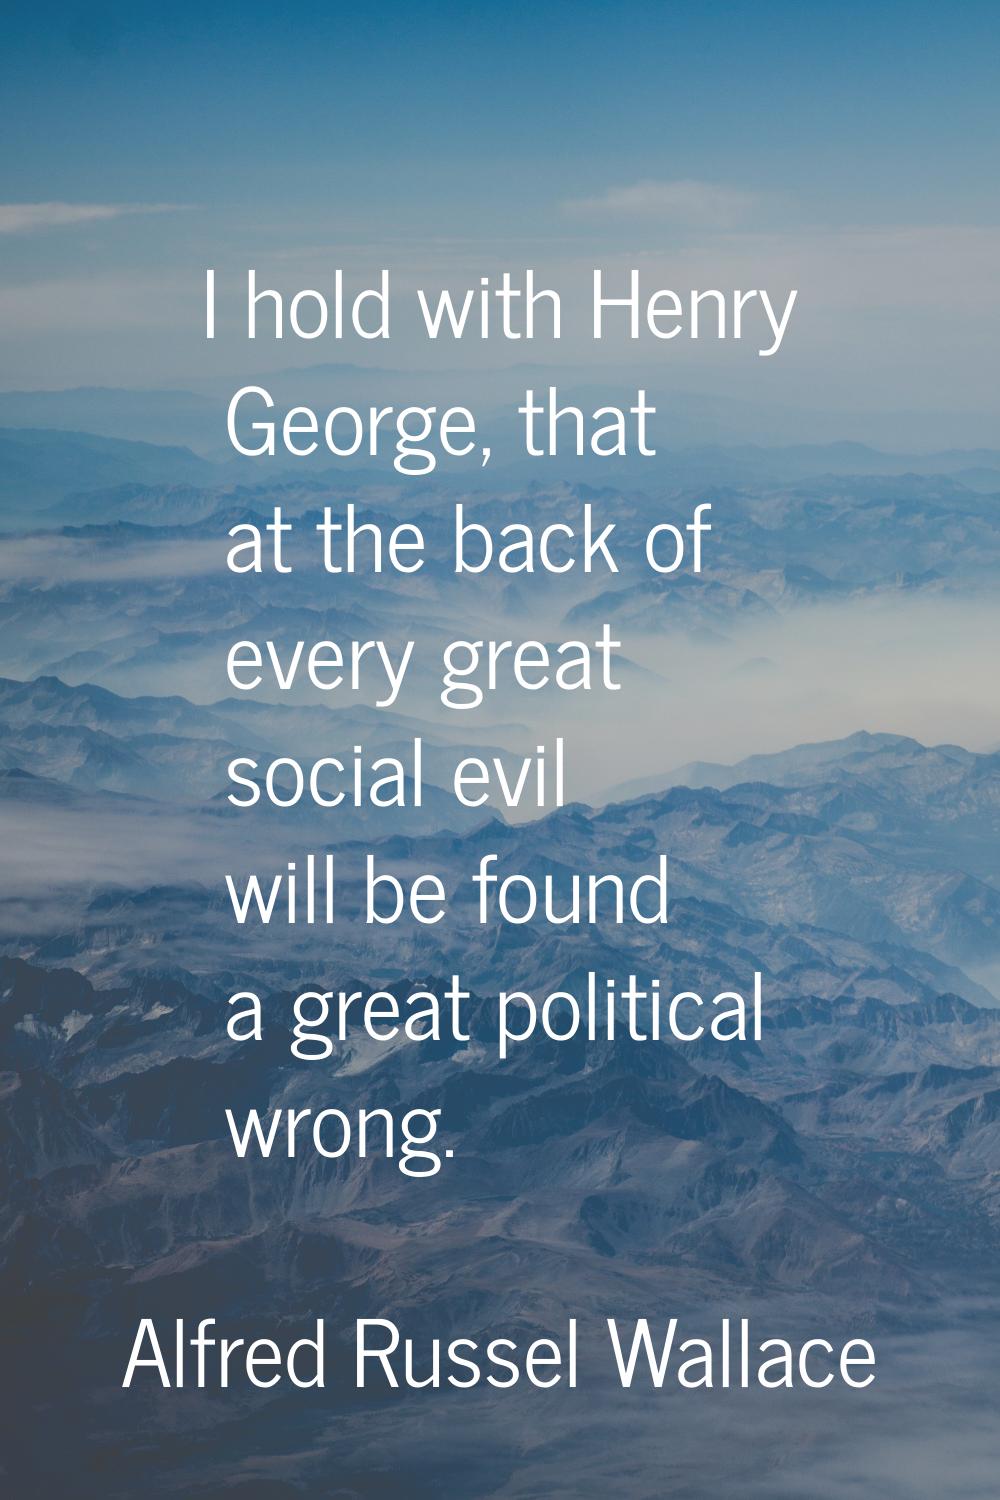 I hold with Henry George, that at the back of every great social evil will be found a great politic